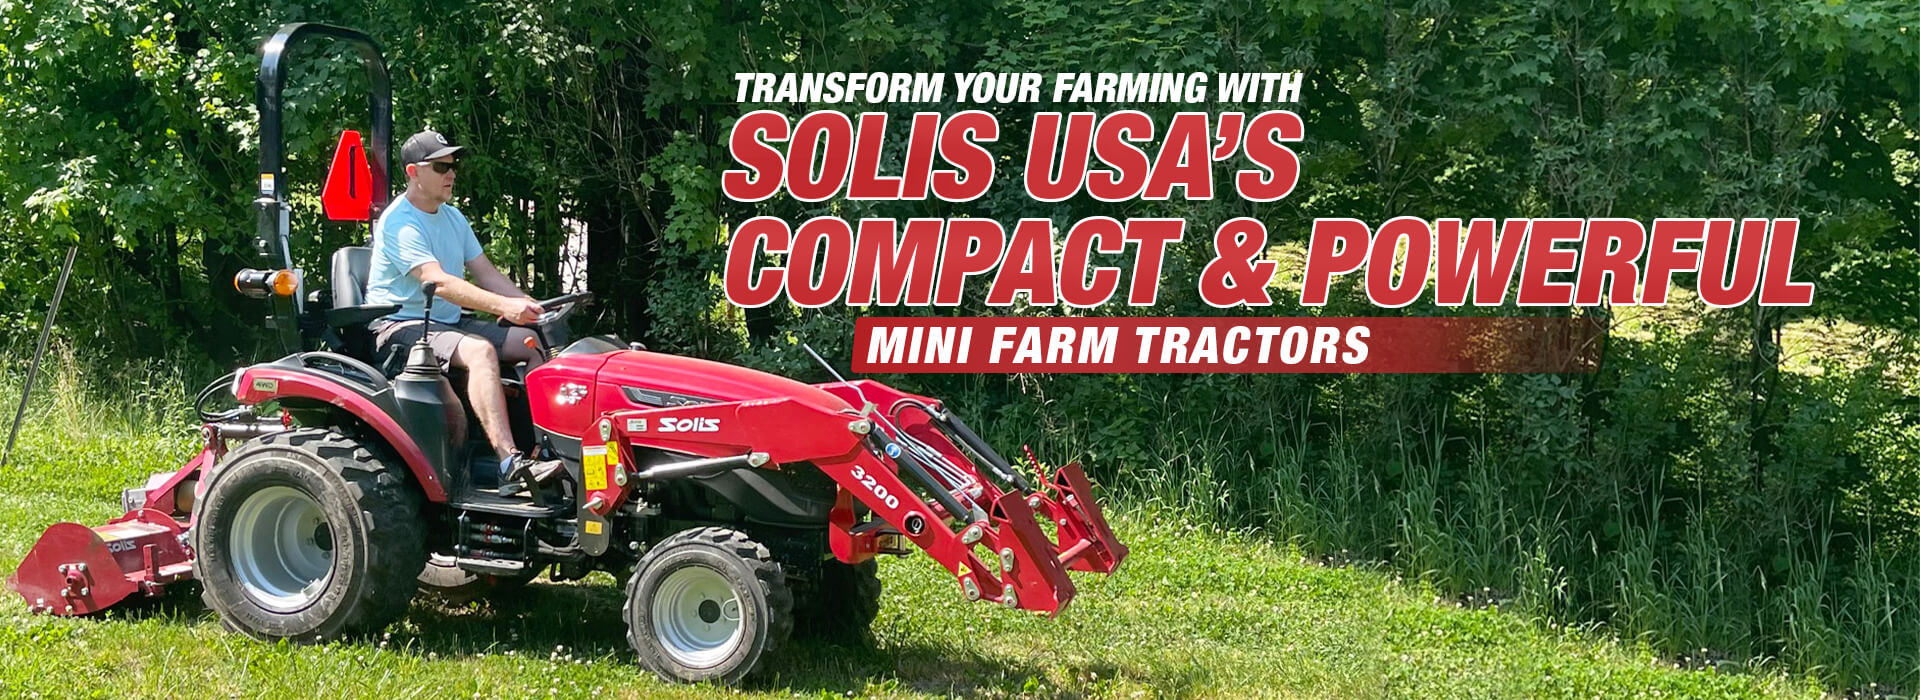 Transform Your Farming with Solis USA’s Compact and Powerful Mini Farm Tractors